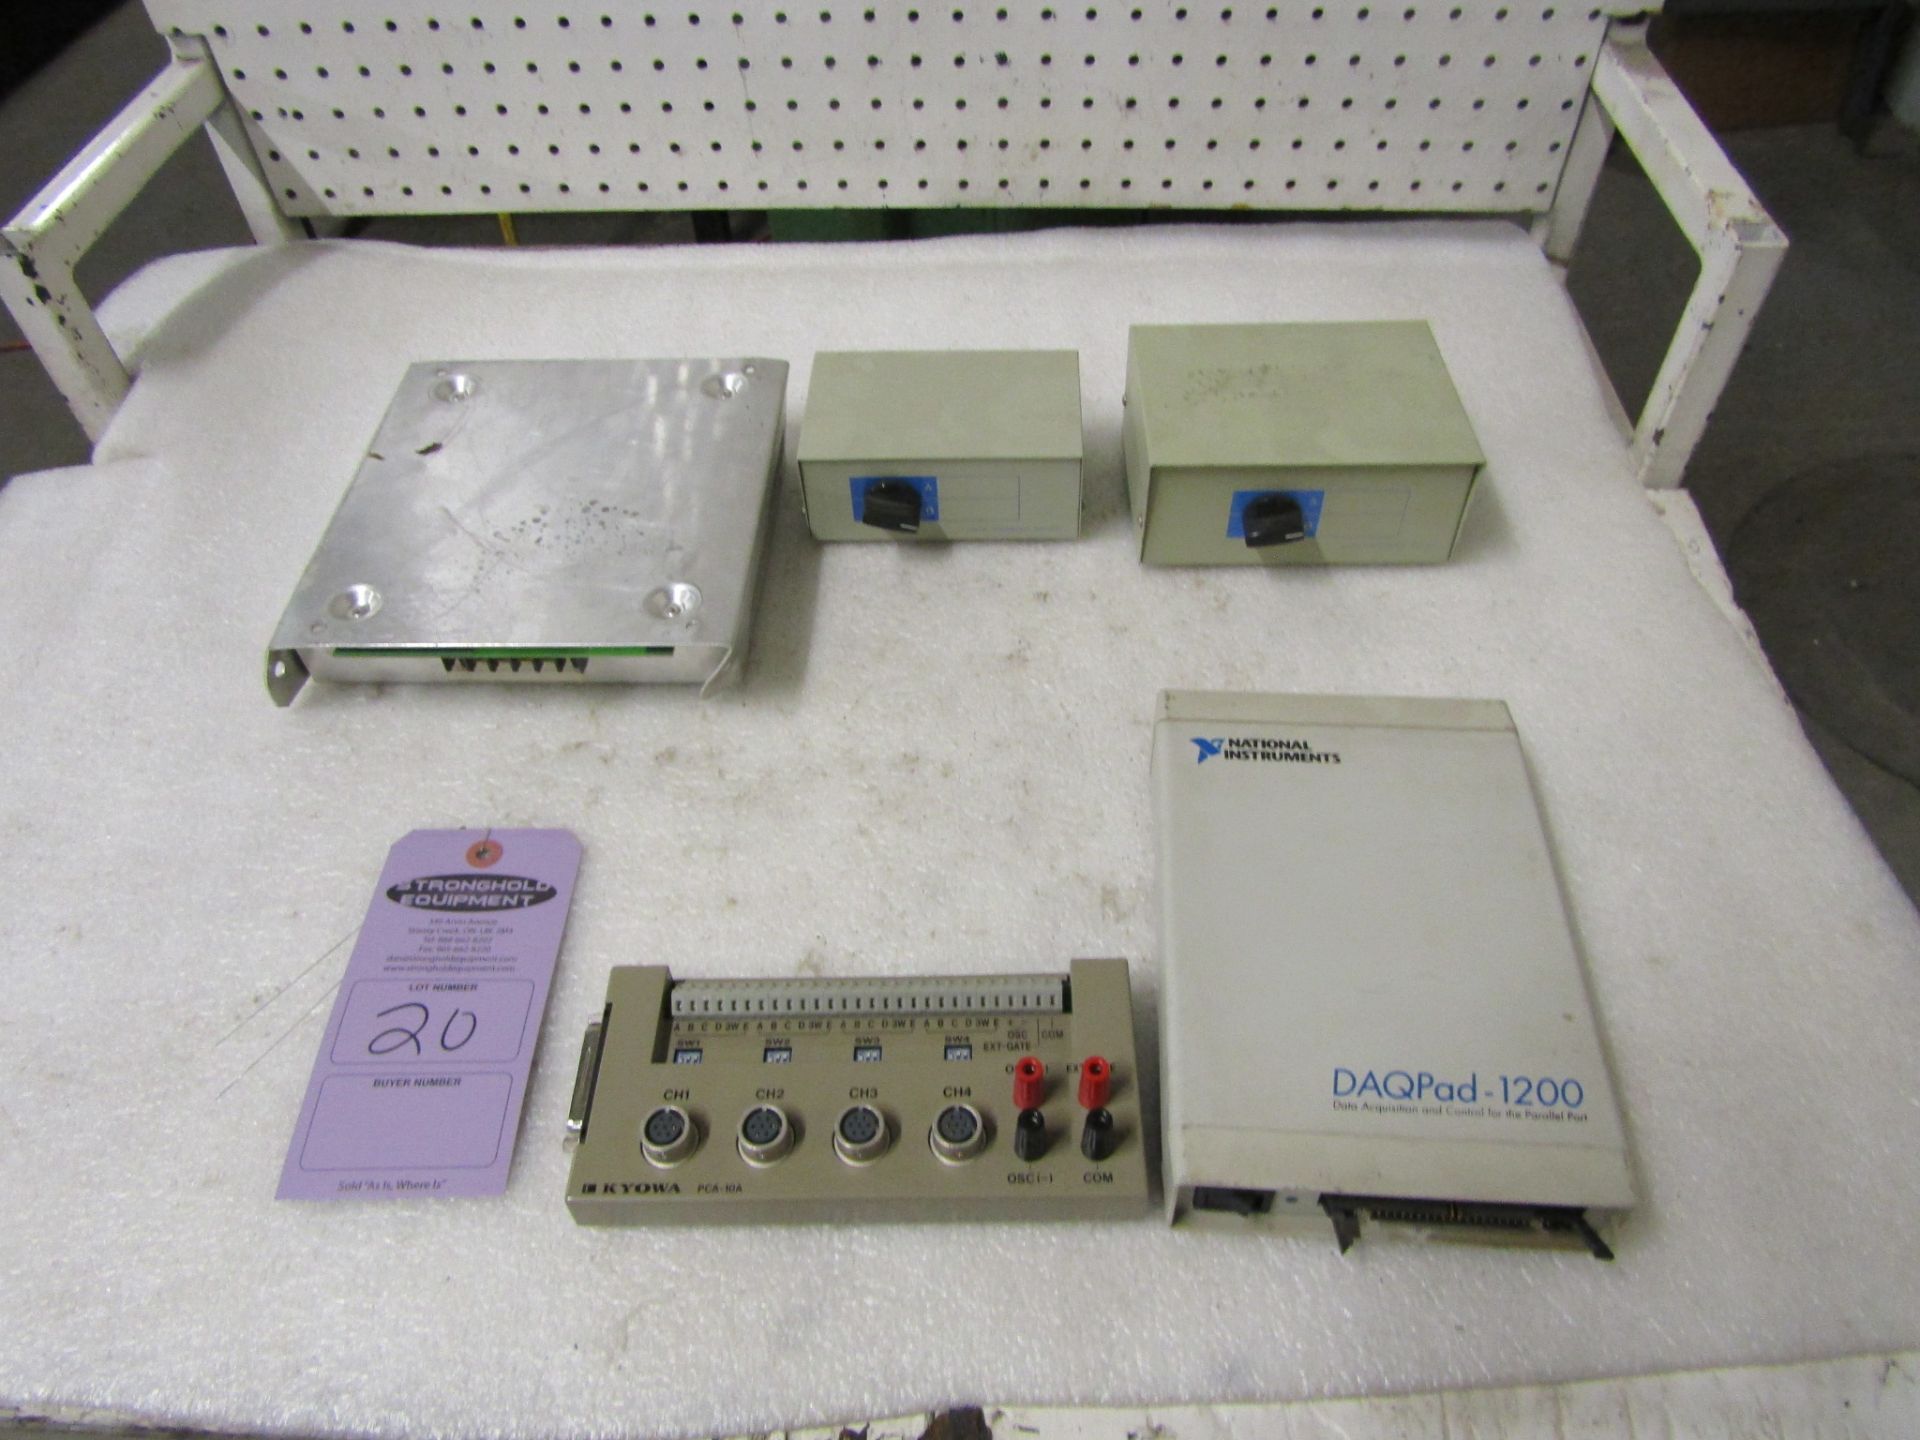 Lot of Electrical units - Staco controller, Data transfer units and DAQPad-1200 unit with Rockwell